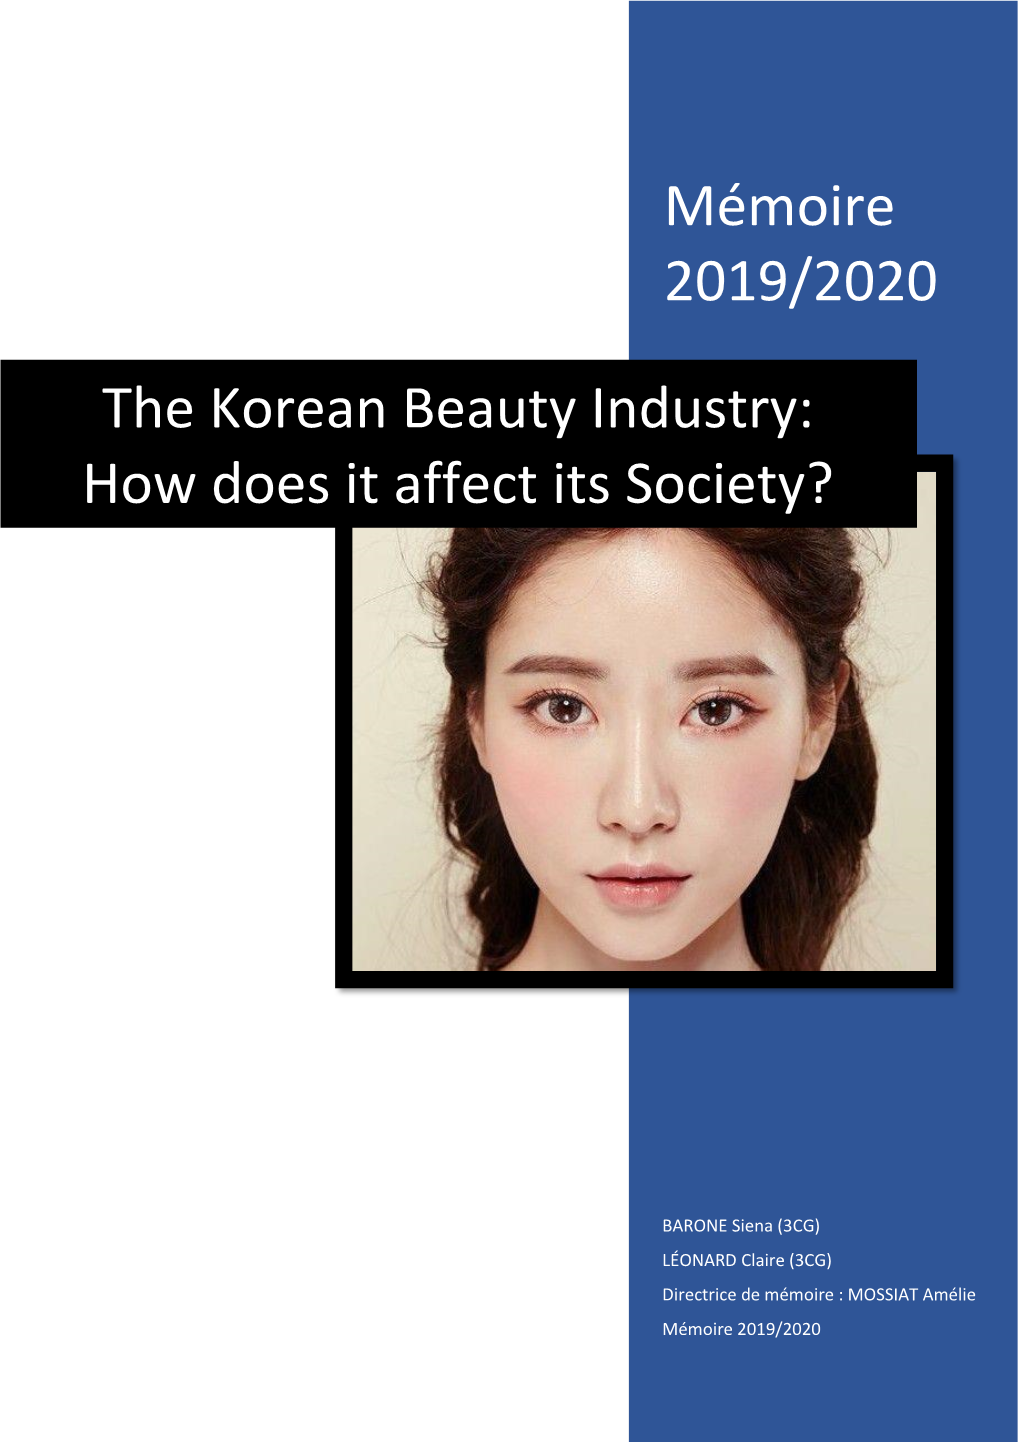 The Korean Beauty Industry: How Does It Affect Its Society?